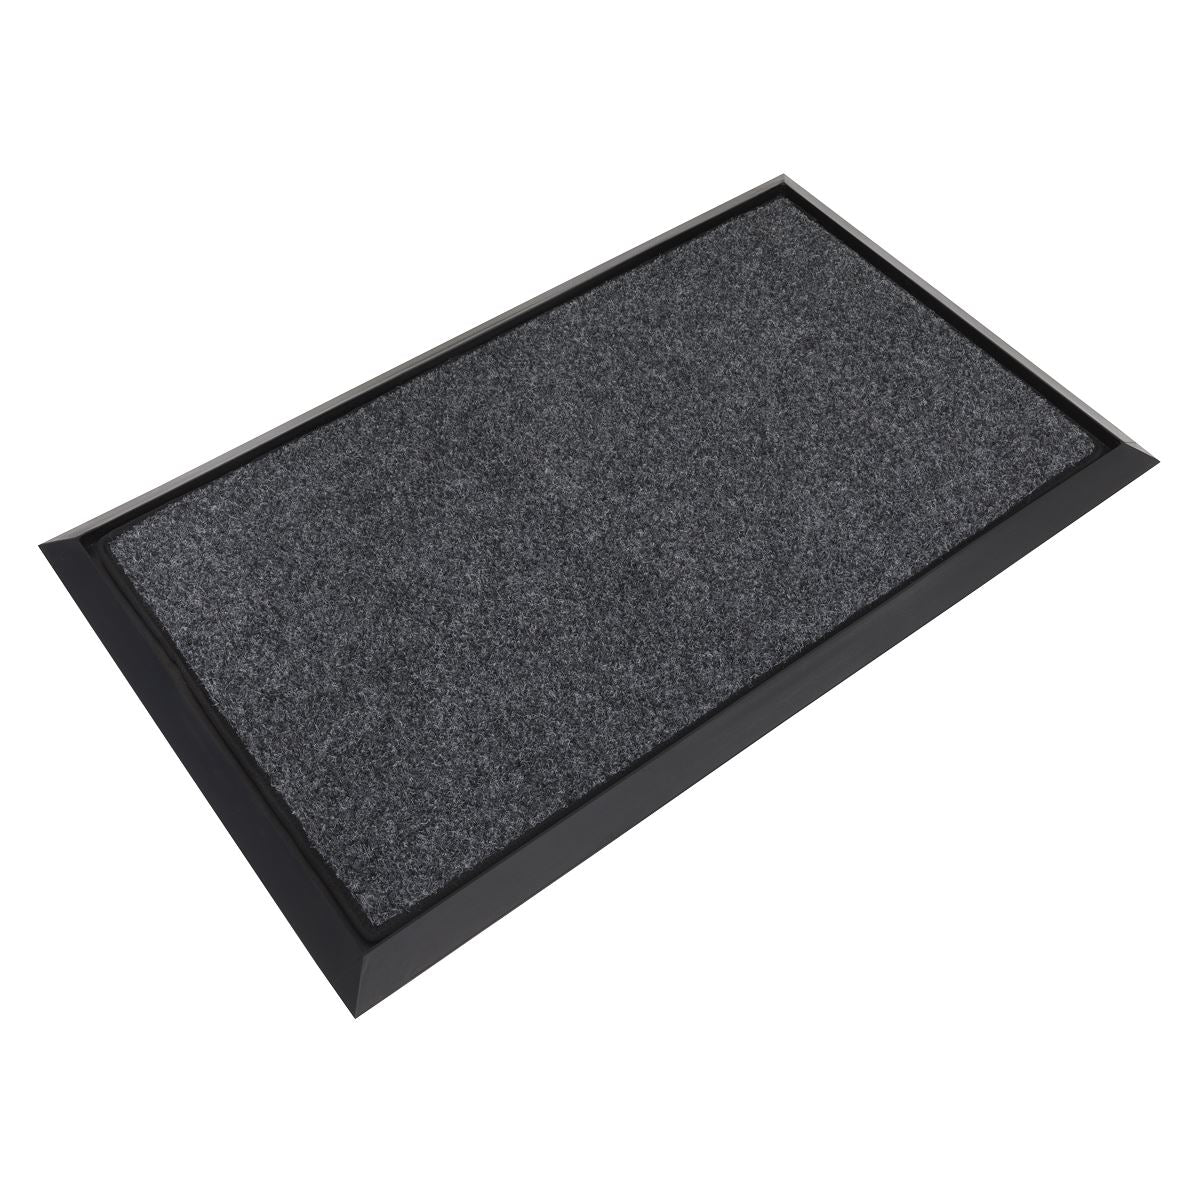 Sealey Rubber Disinfection Mat With Removable Polyester Carpet 450 x 750mm